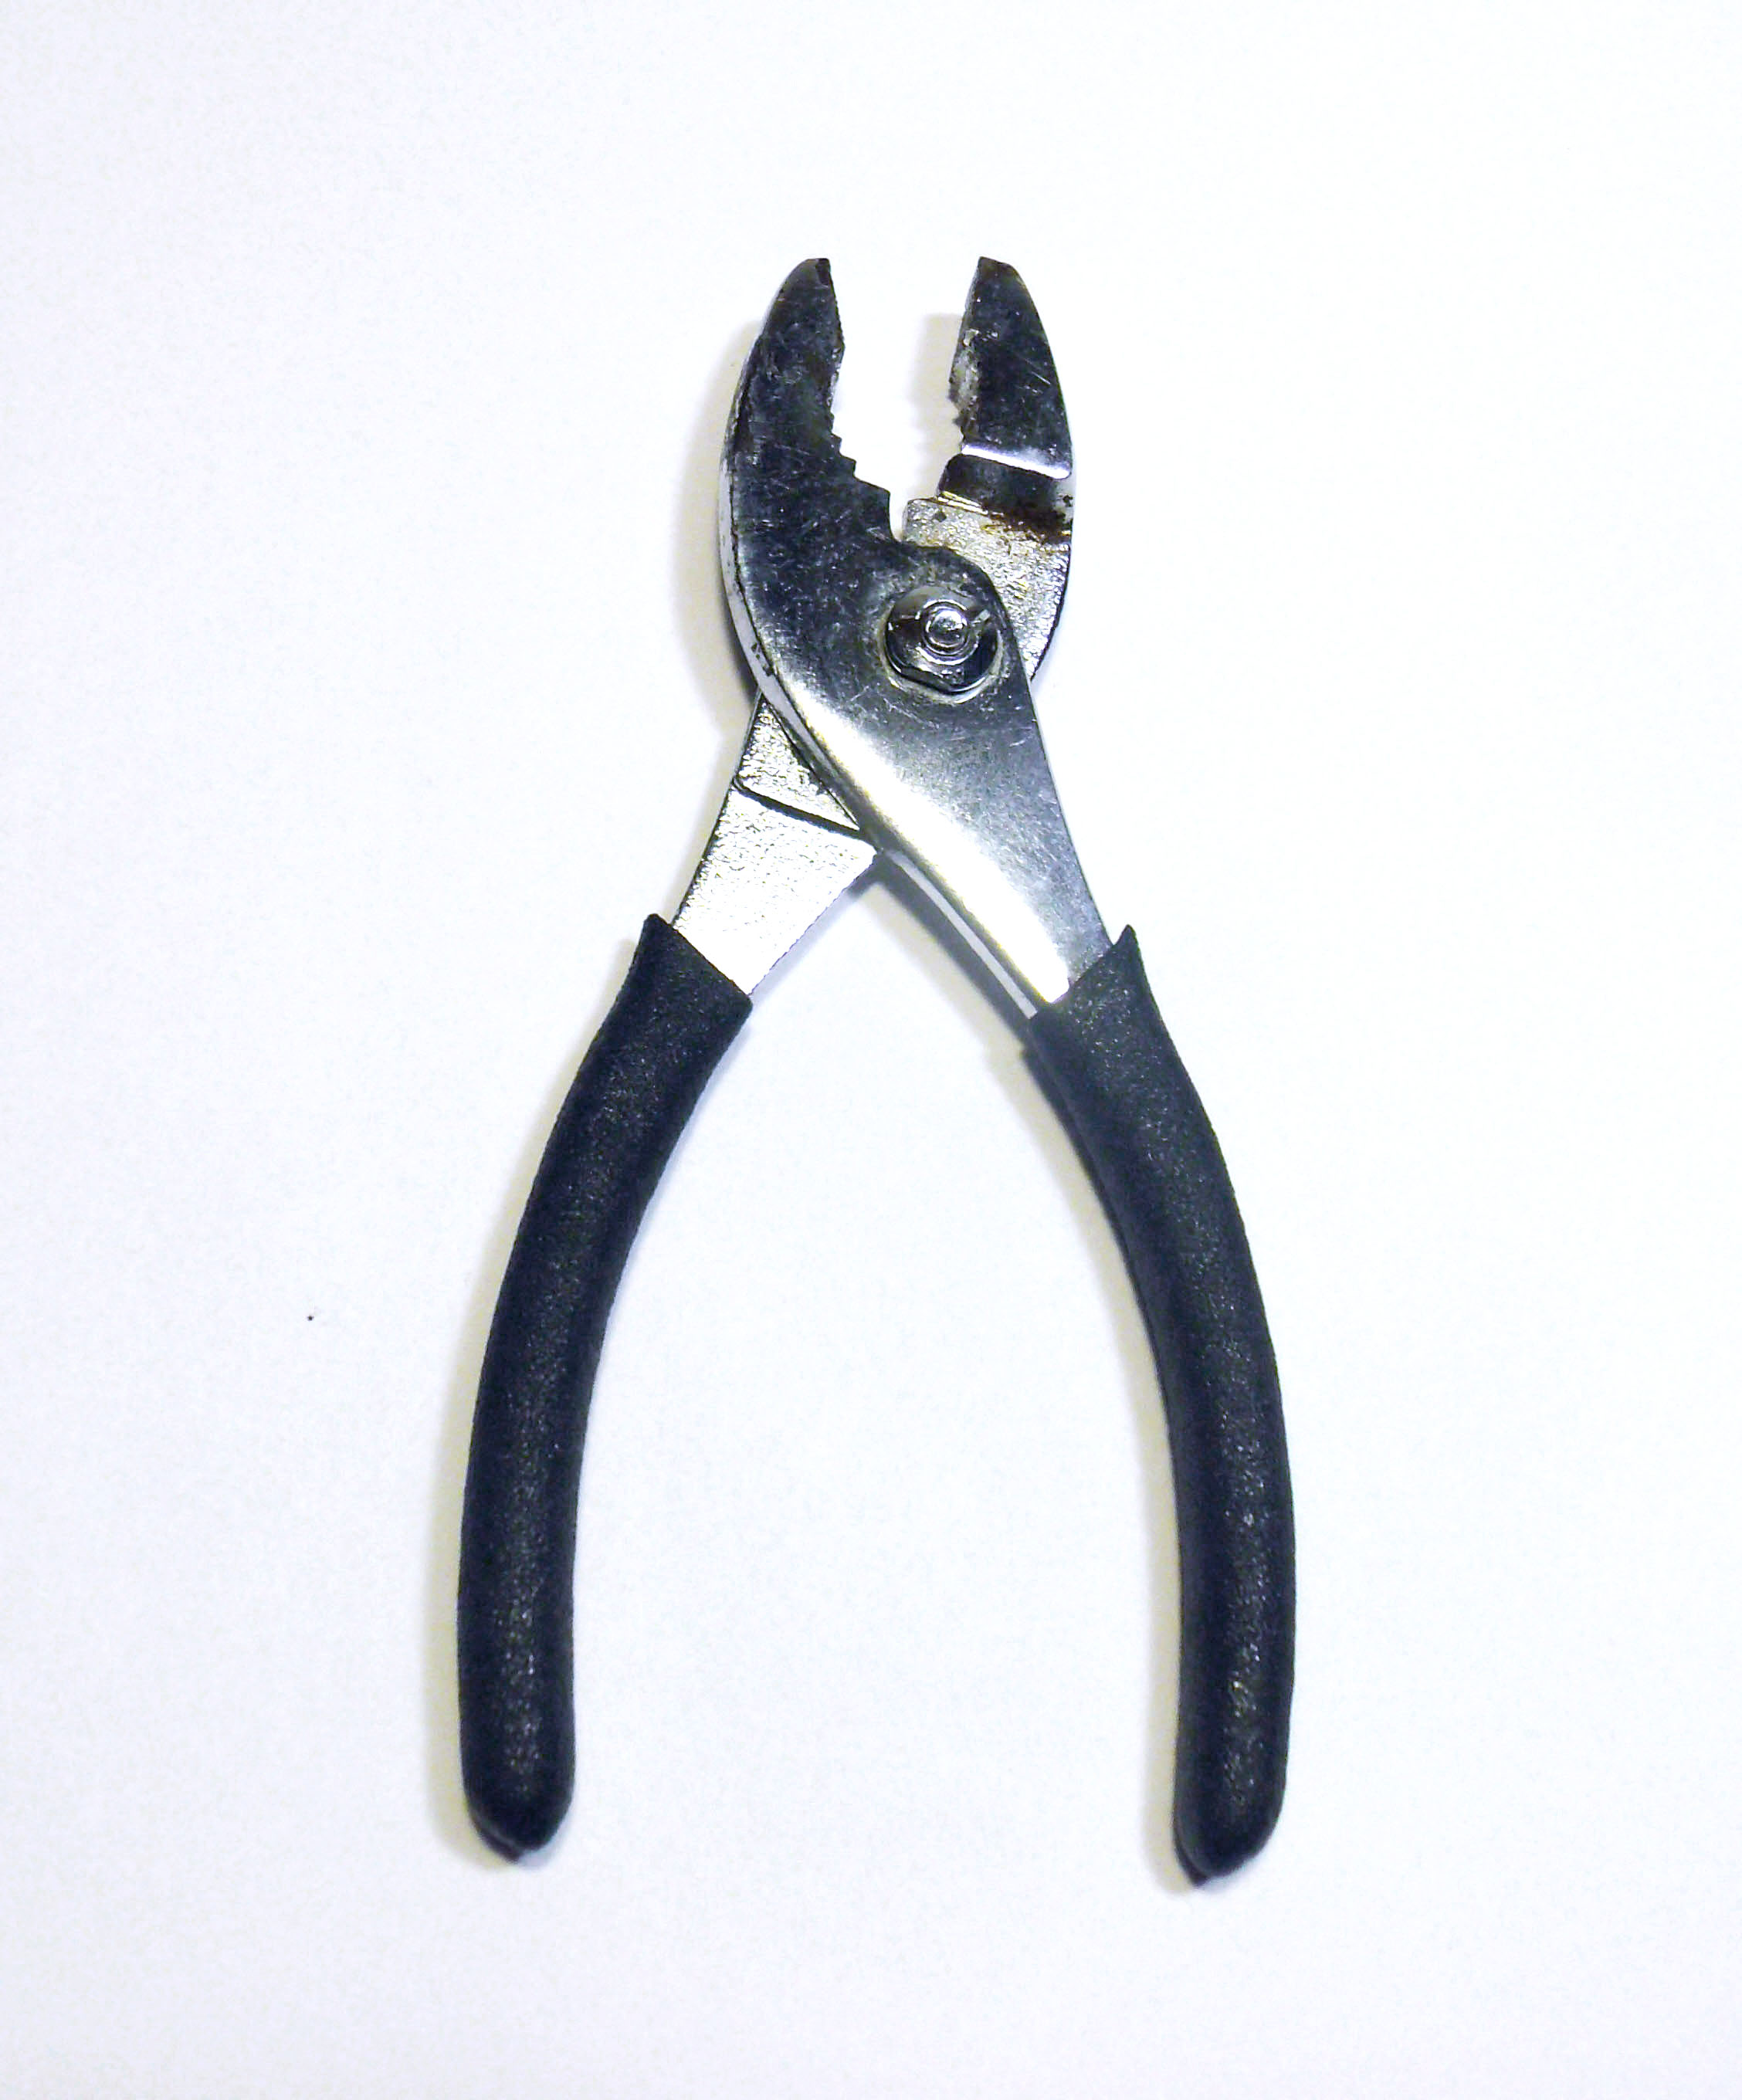 Stainless steel pliers, Pliers, Stainless, Steel, Tool, HQ Photo